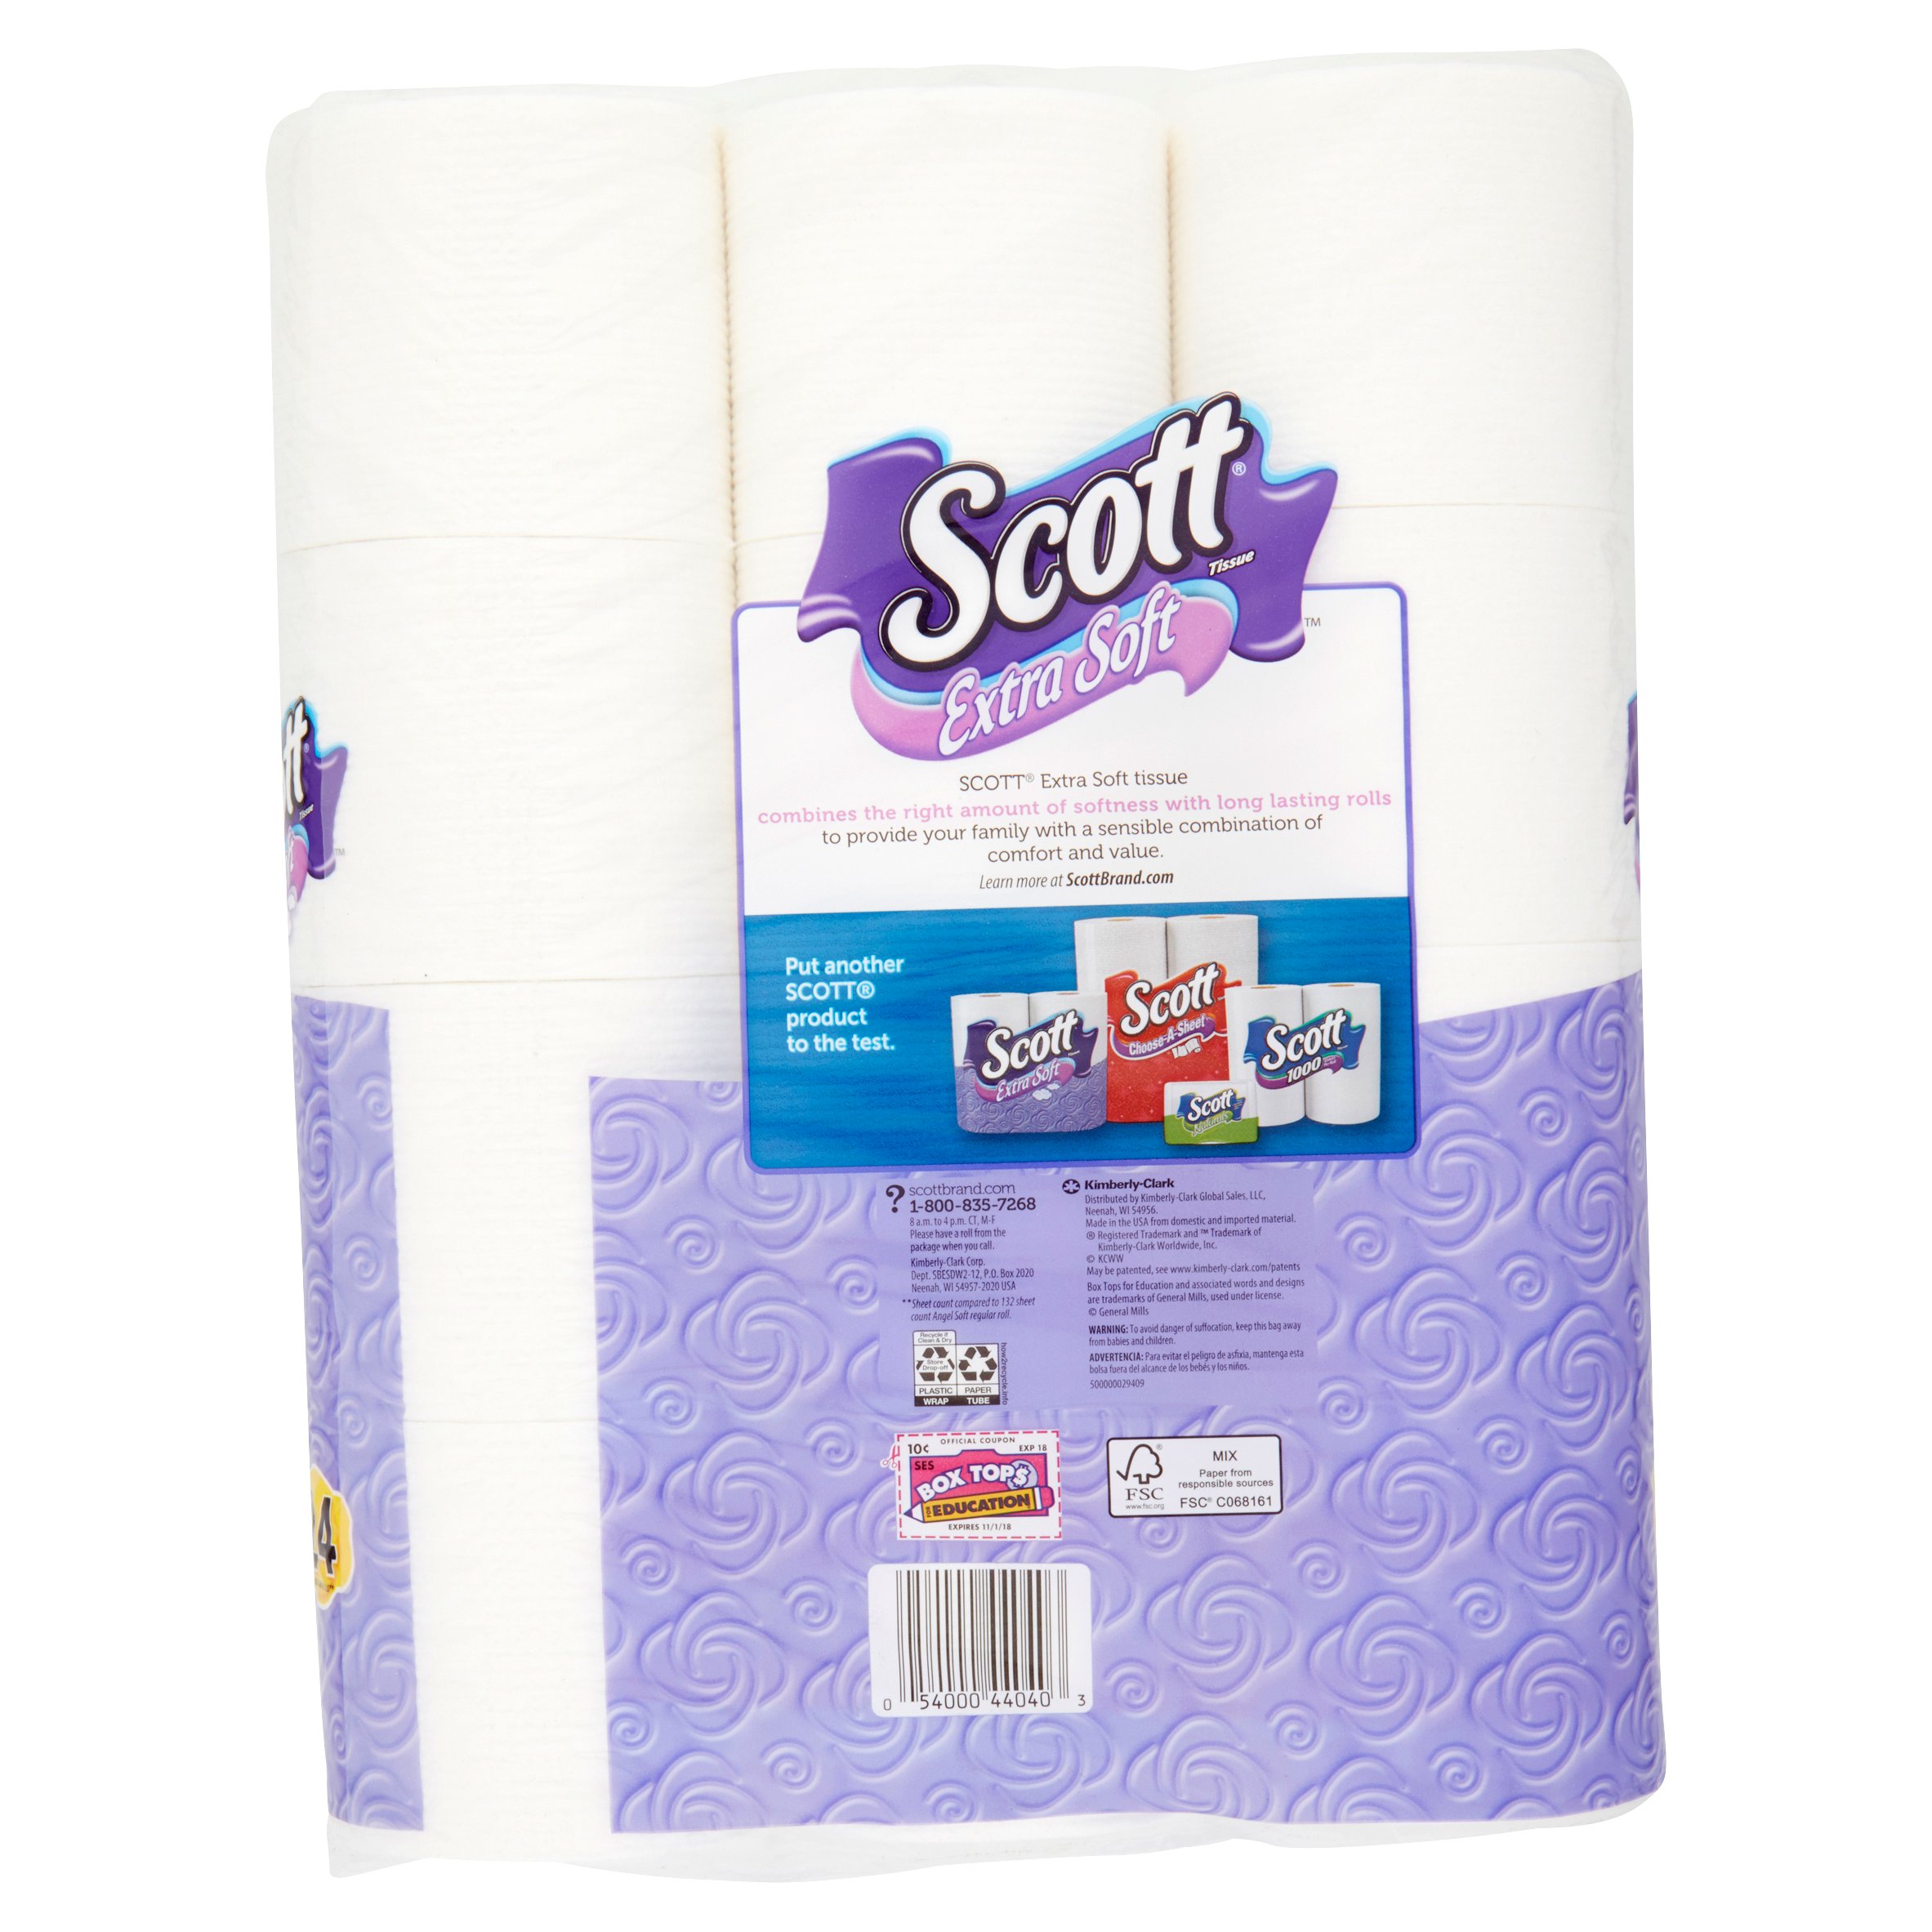 Scott Toilet Paper, Extra Soft, 12 Double Rolls - image 4 of 6